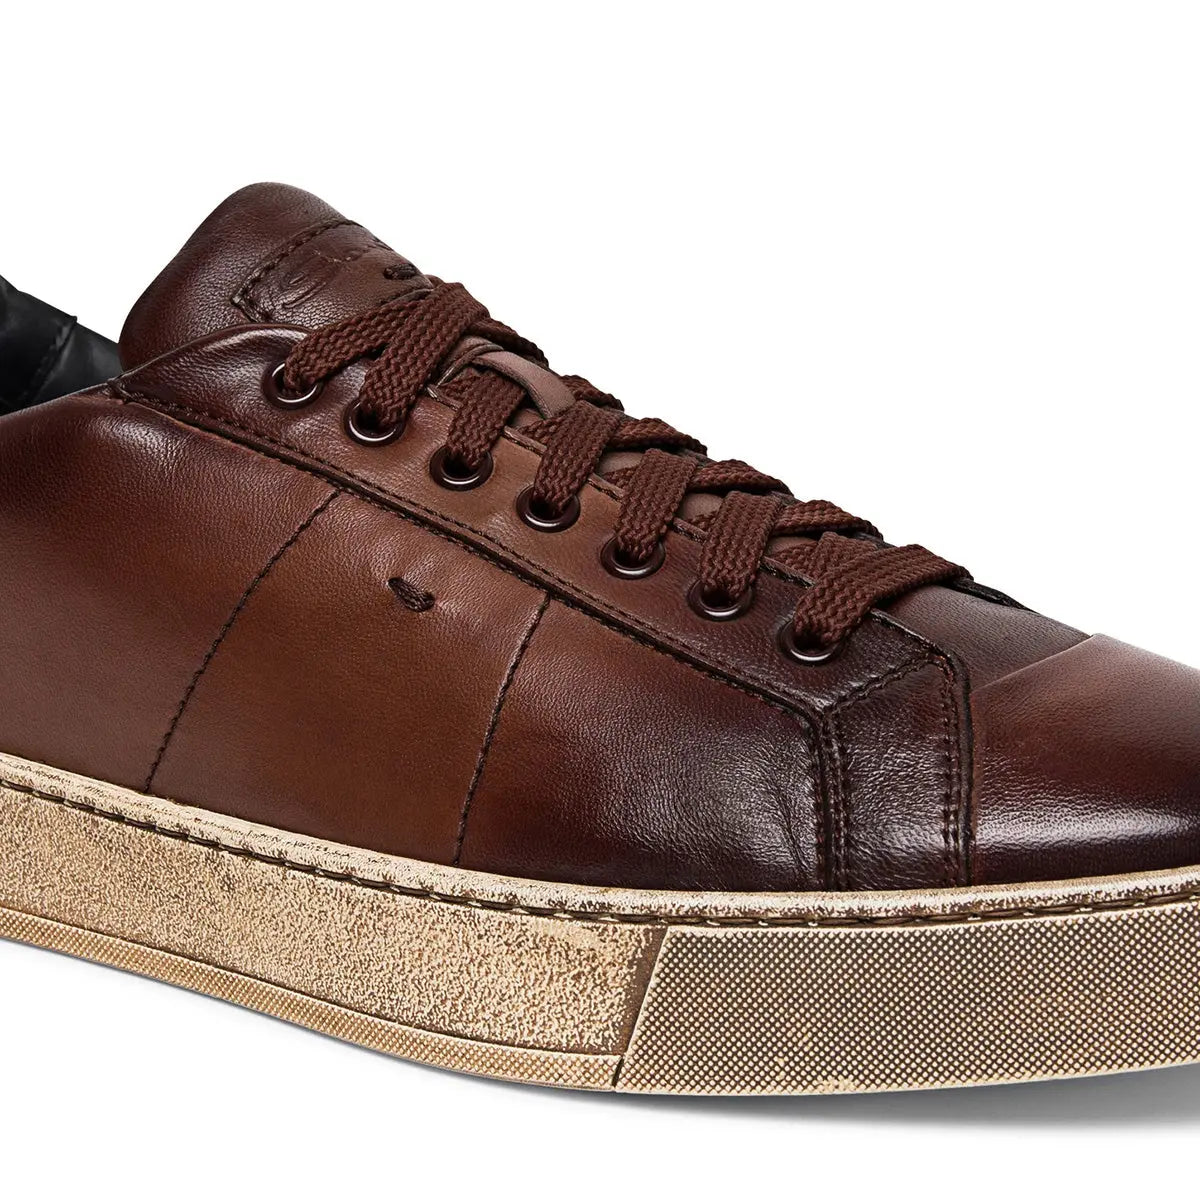 Brown Aged Leather Low-Top Sneakers  Santoni Casual   